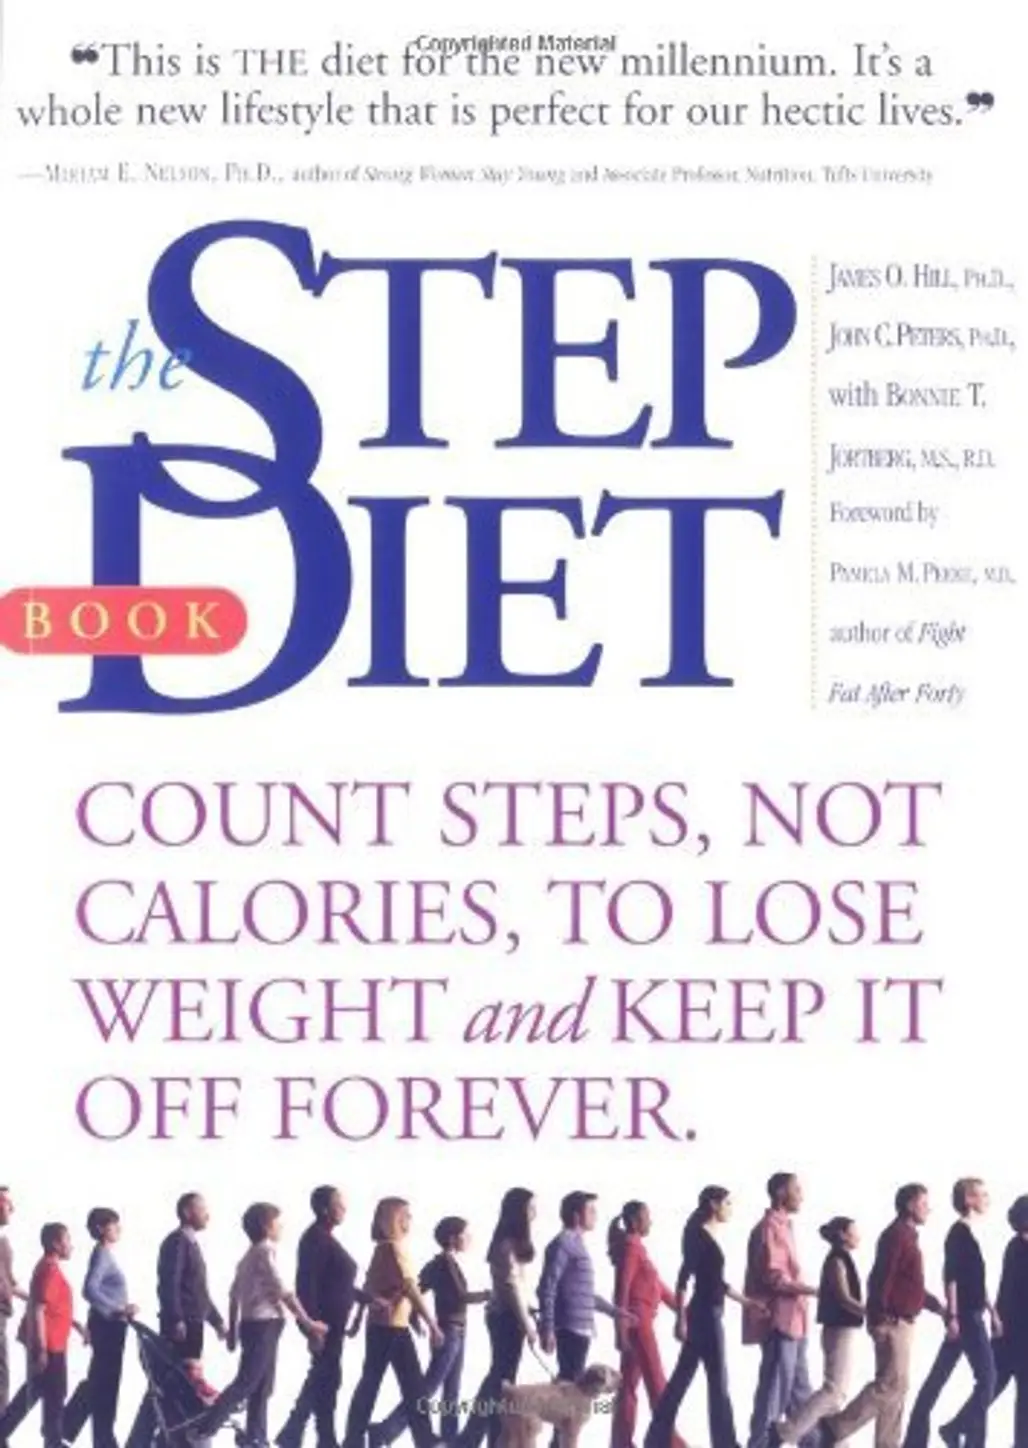 The Step Diet Book by by James O. Hill